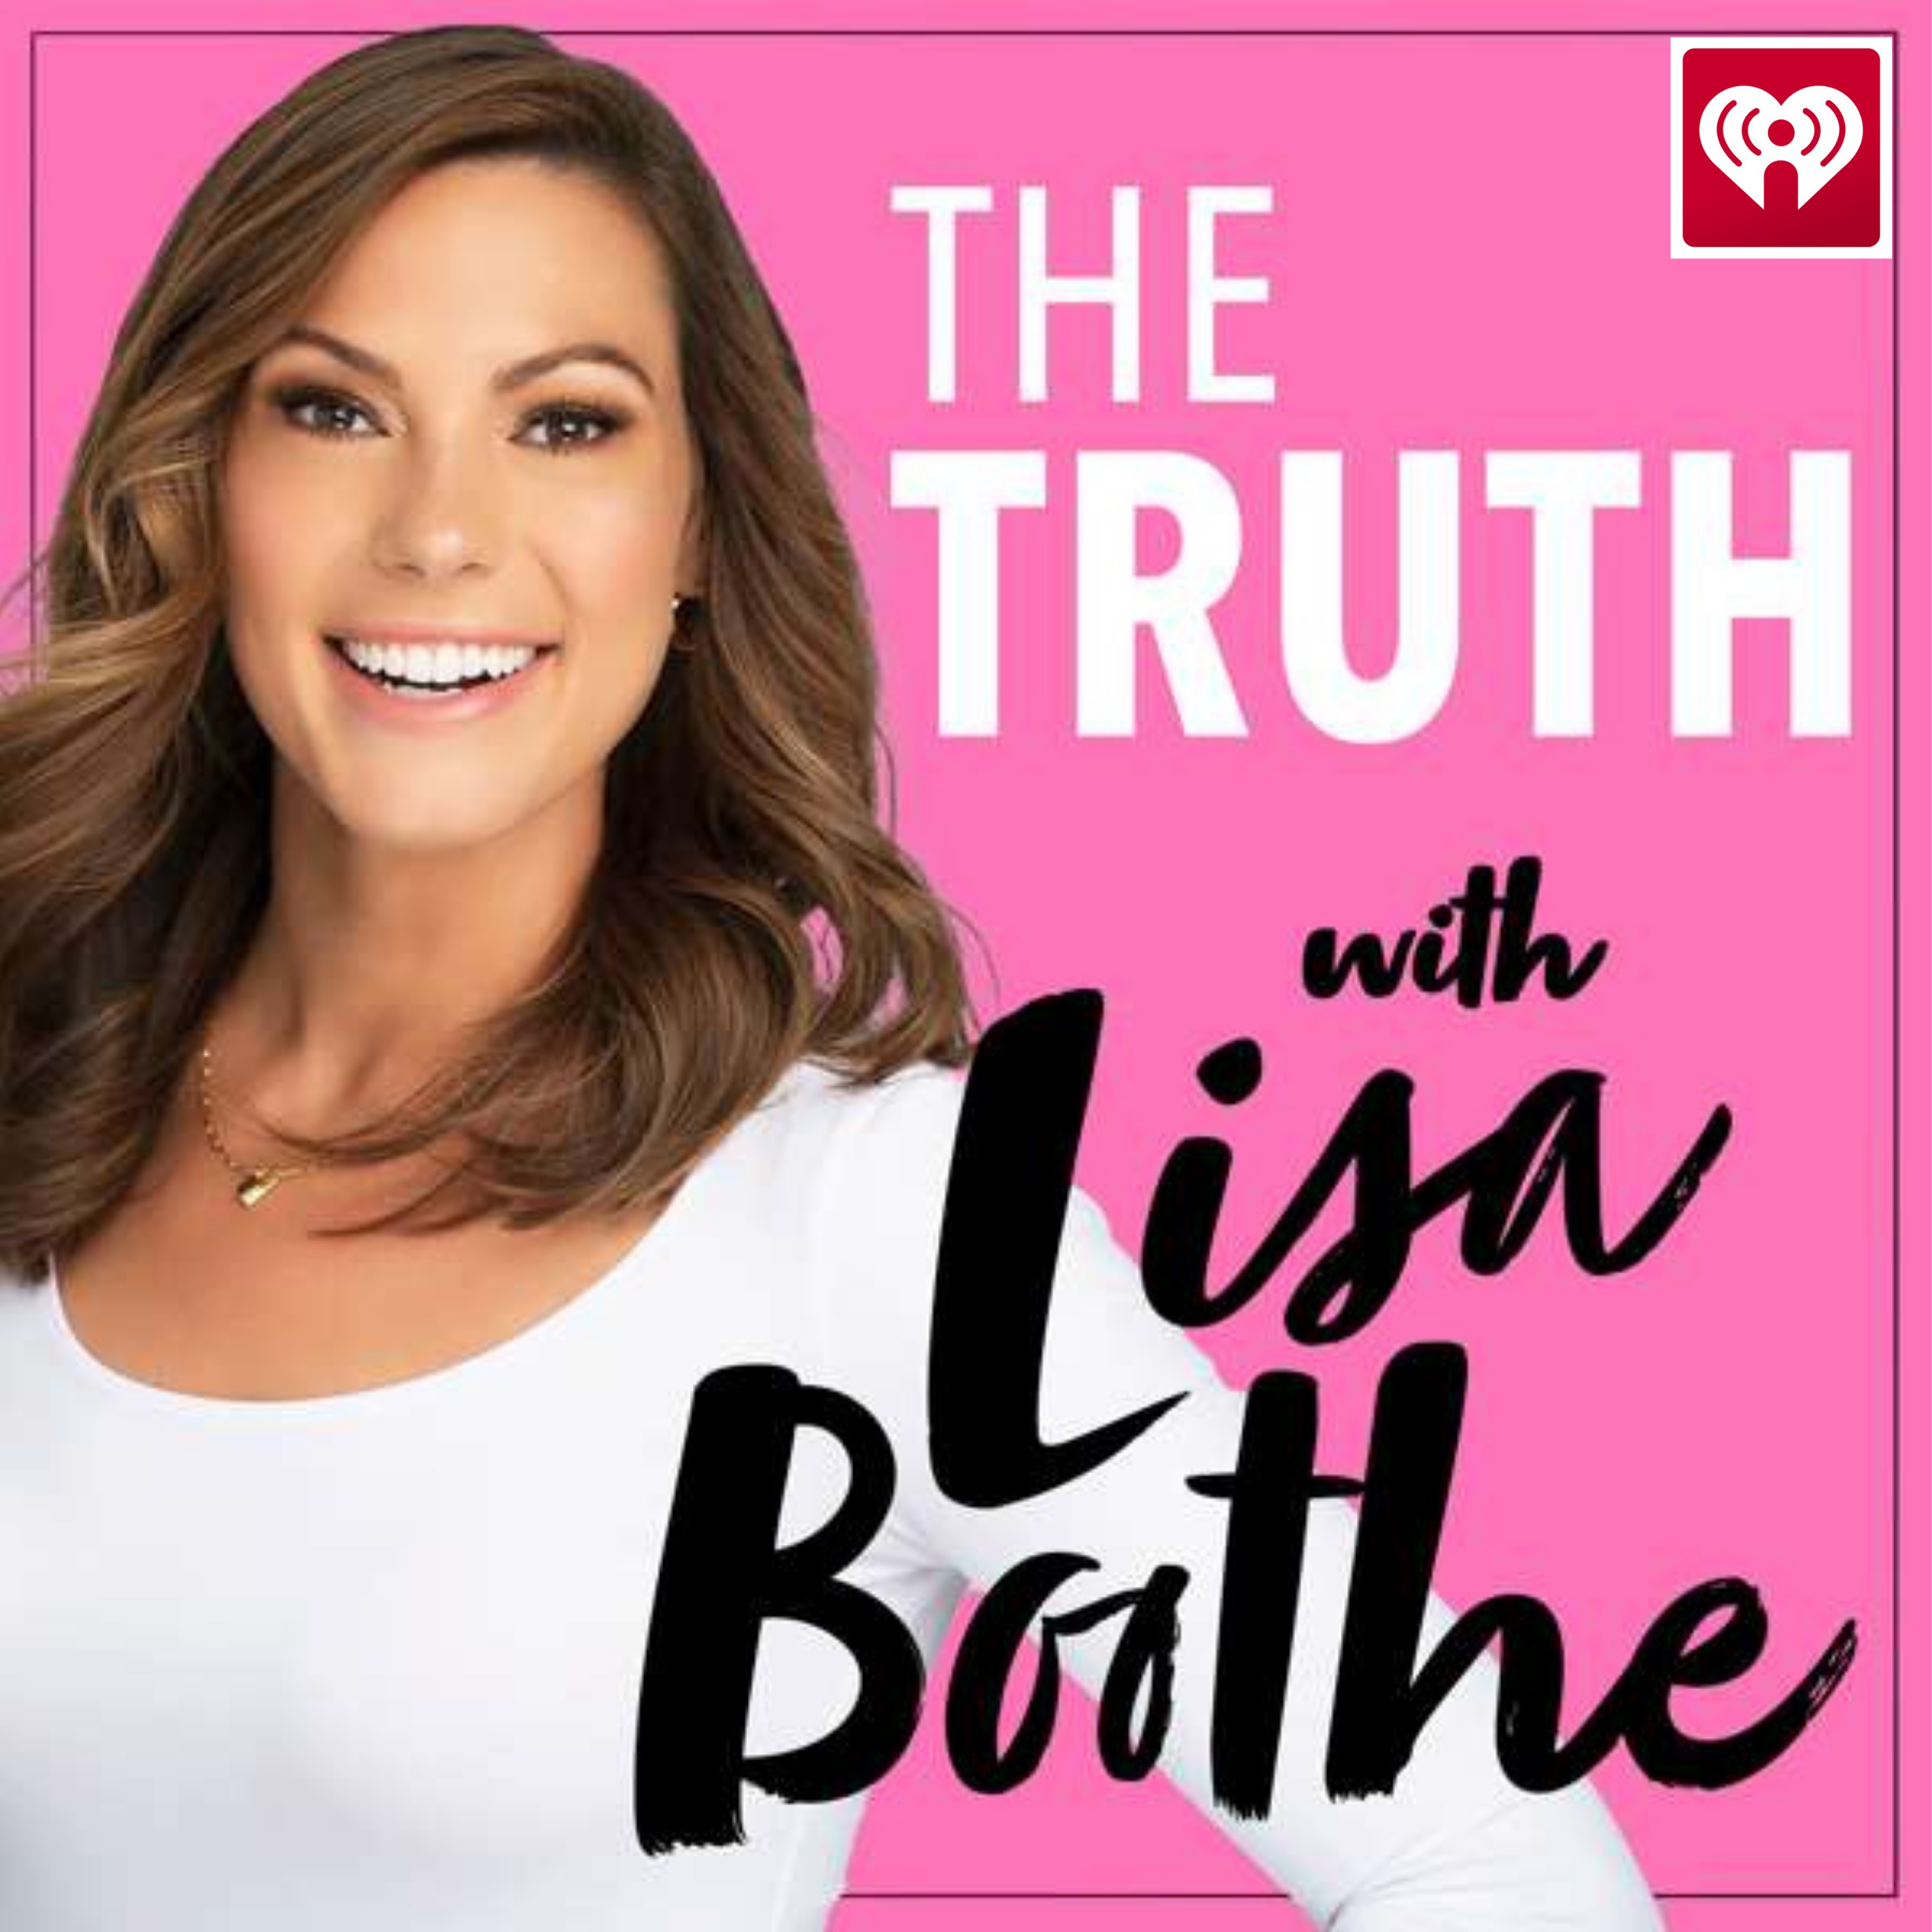 The Truth with Lisa Boothe: Has America Lost Its Passion for Freedom?